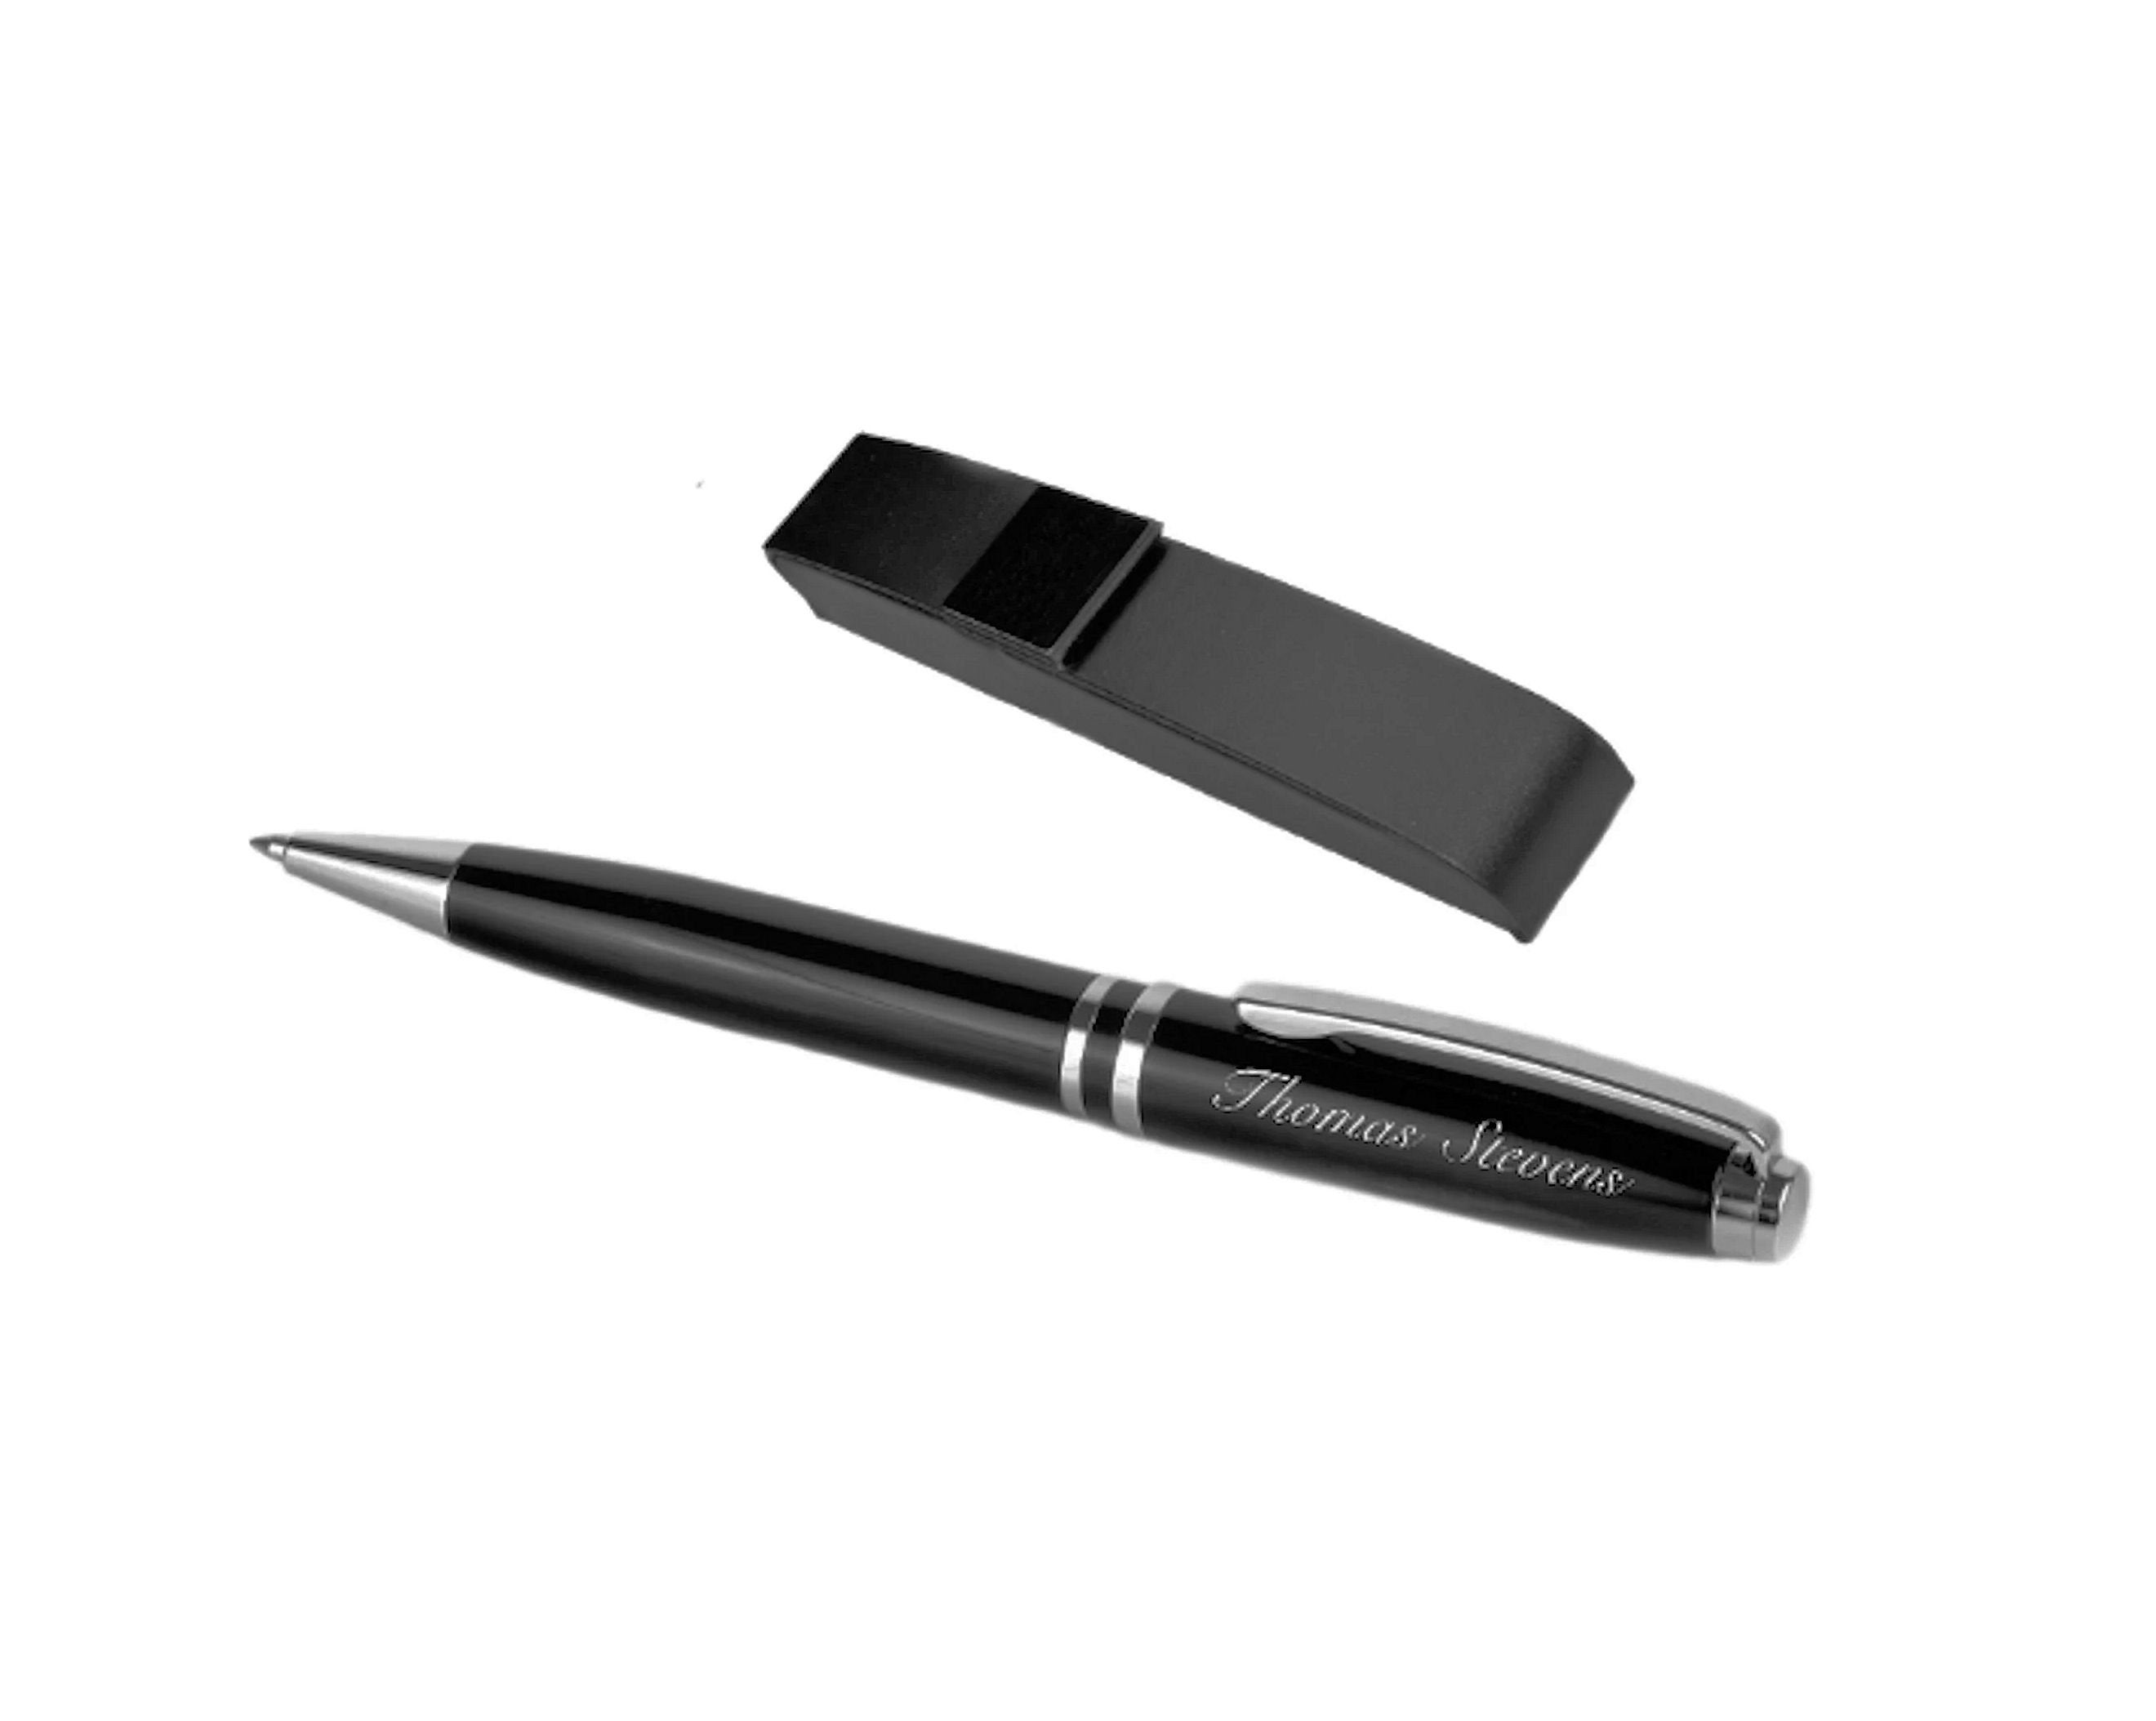 Sterling Silver Horseshoe Motif Black Ink Ball-Point Pen, 'Fortune Suns